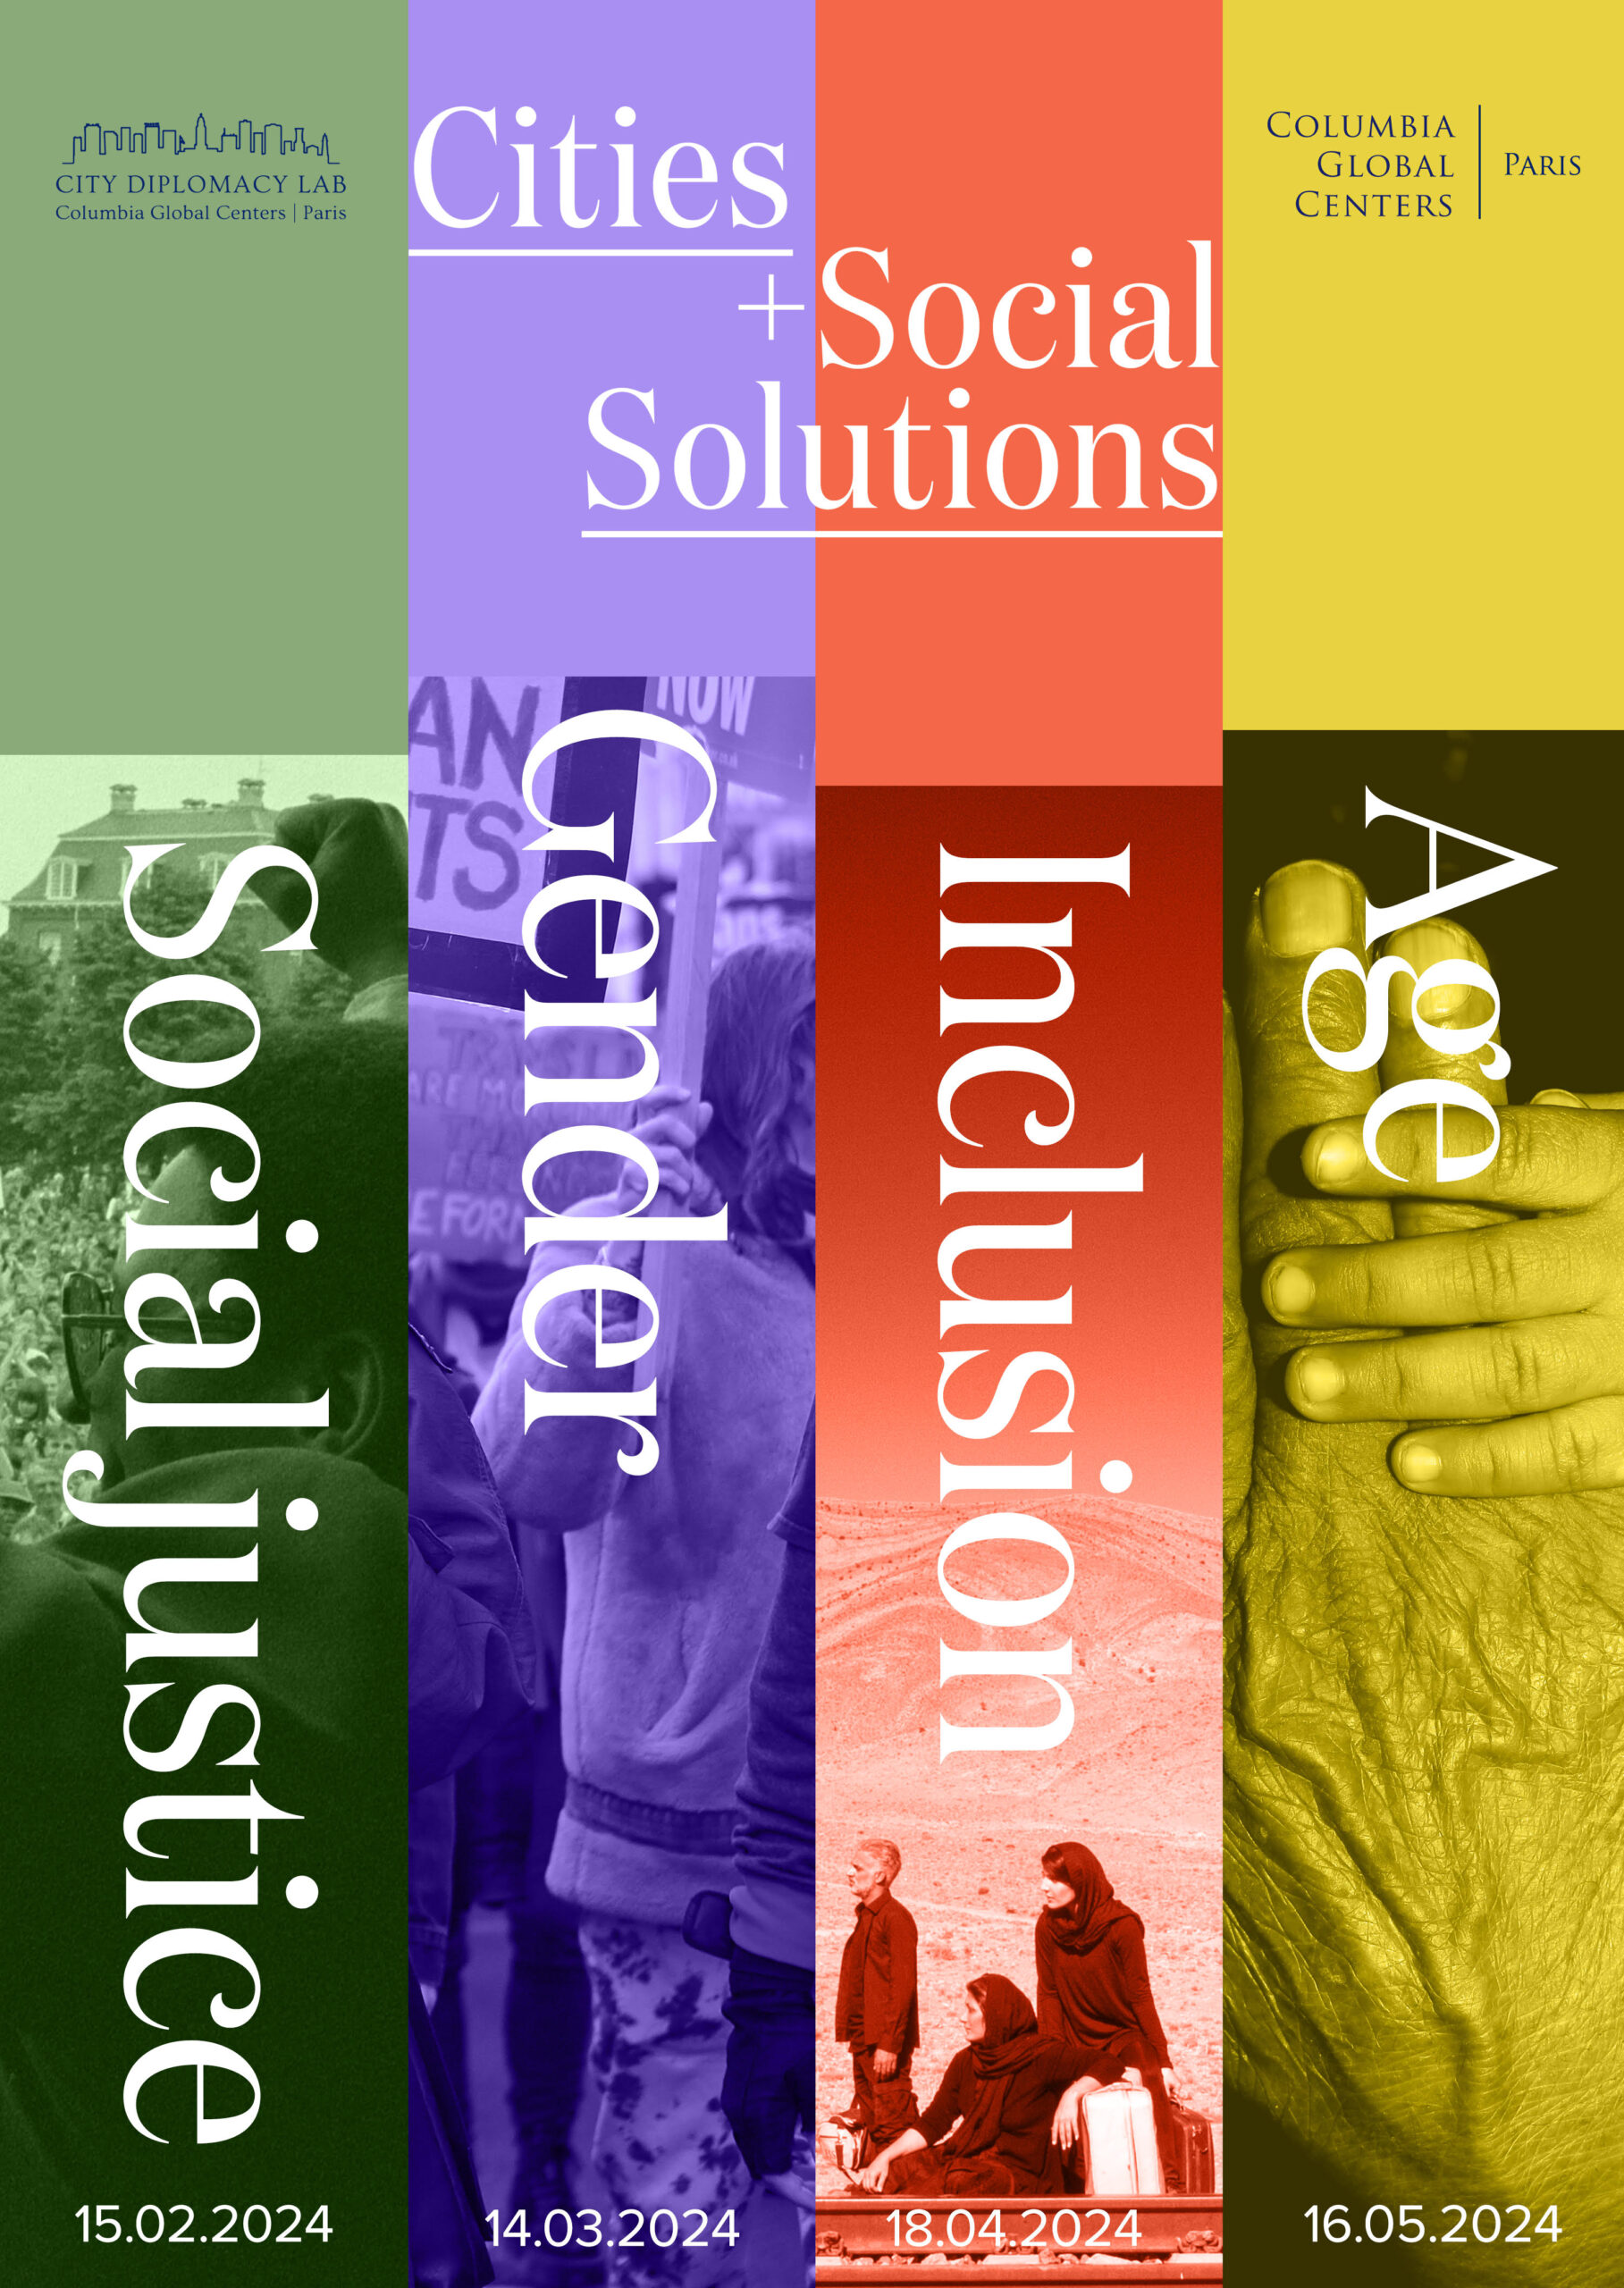 Introducing our new webinar series: Cities and Social Solutions